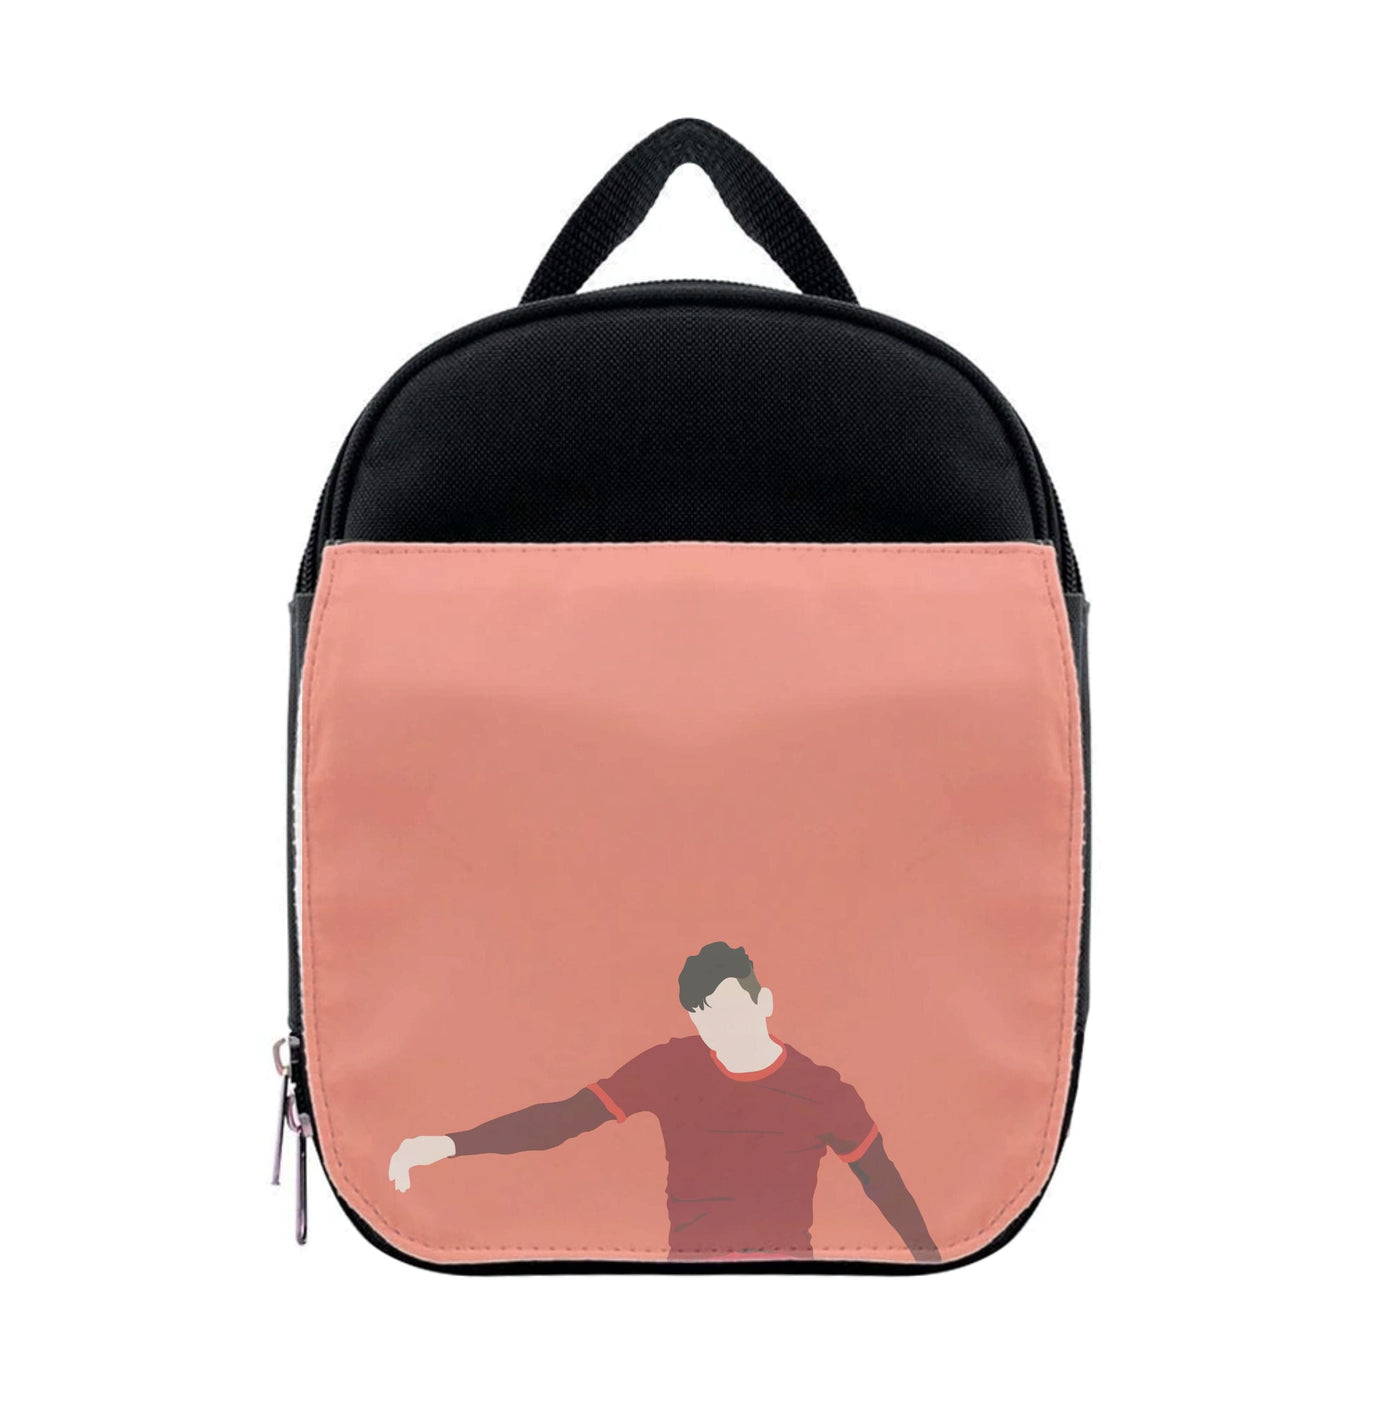 Andy Robertson - Football Lunchbox